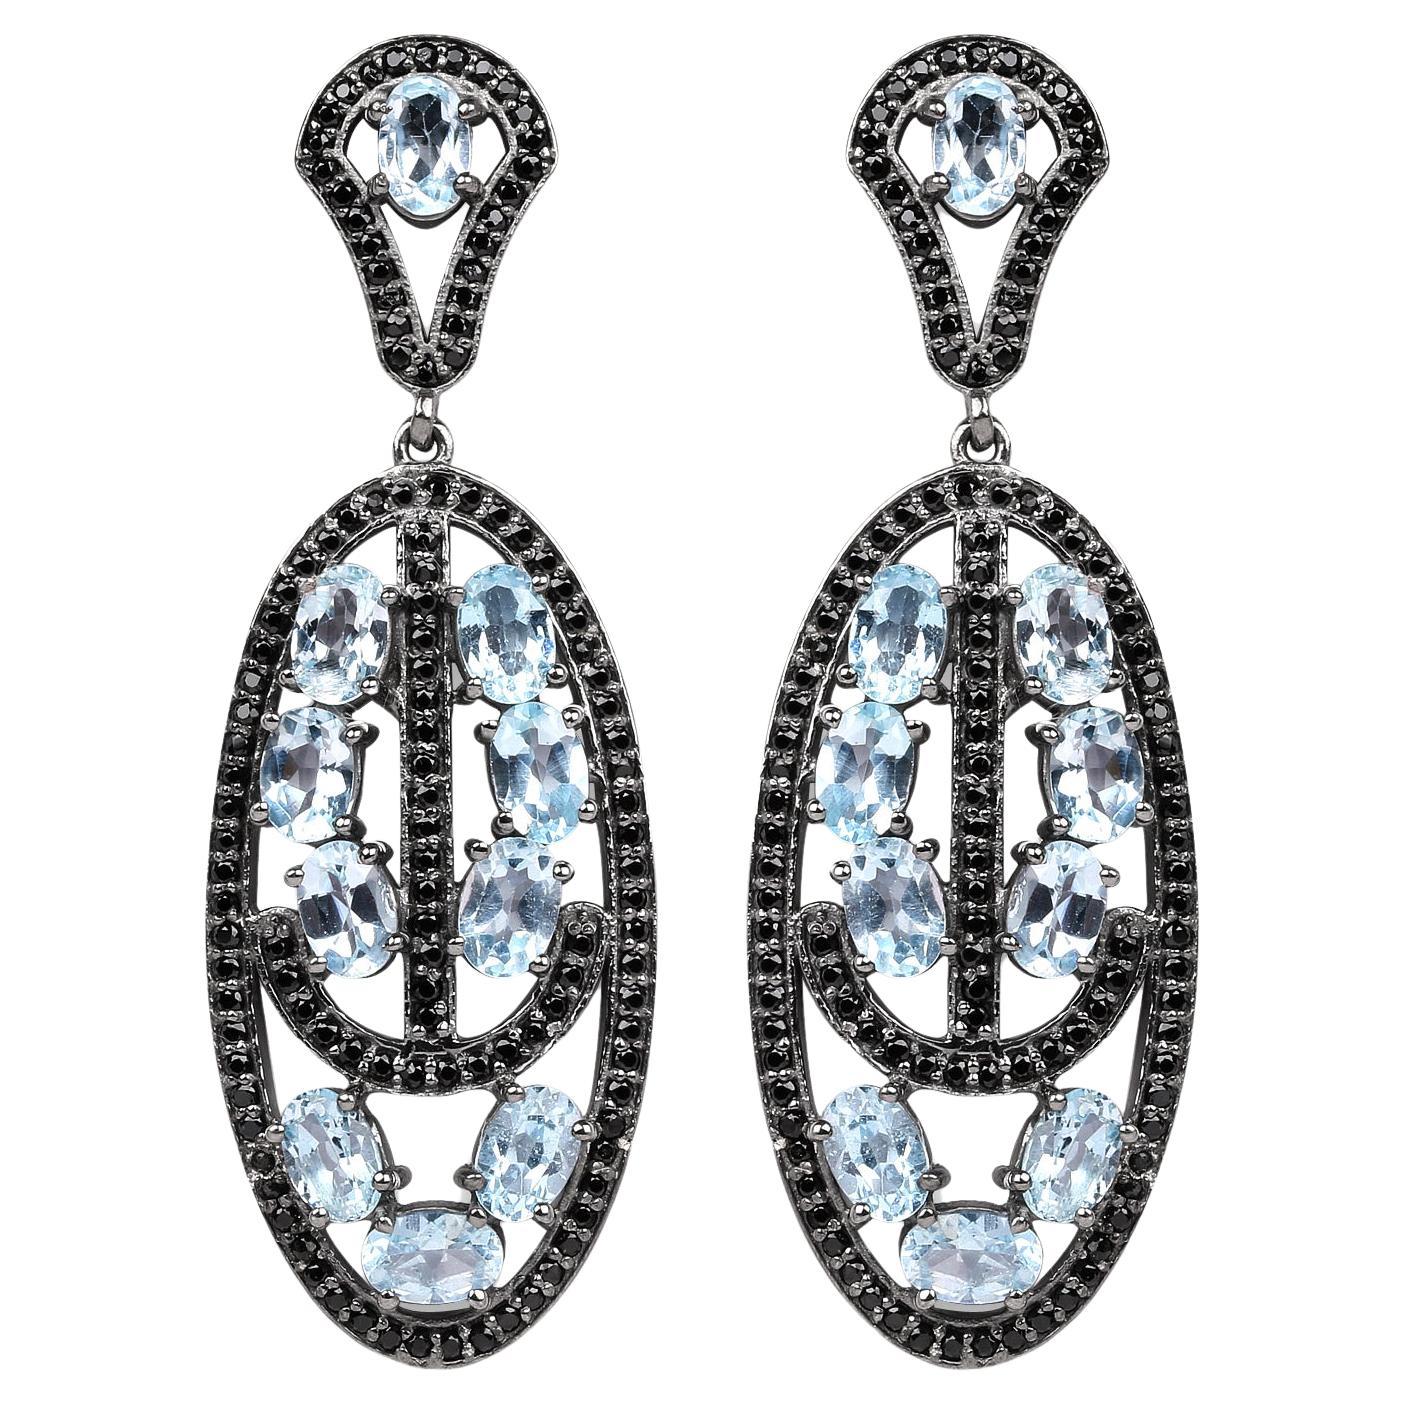 Blue Topaz Dangle Earrings With Black Spinels 13.9 Carats Rhodium Plated Silver For Sale